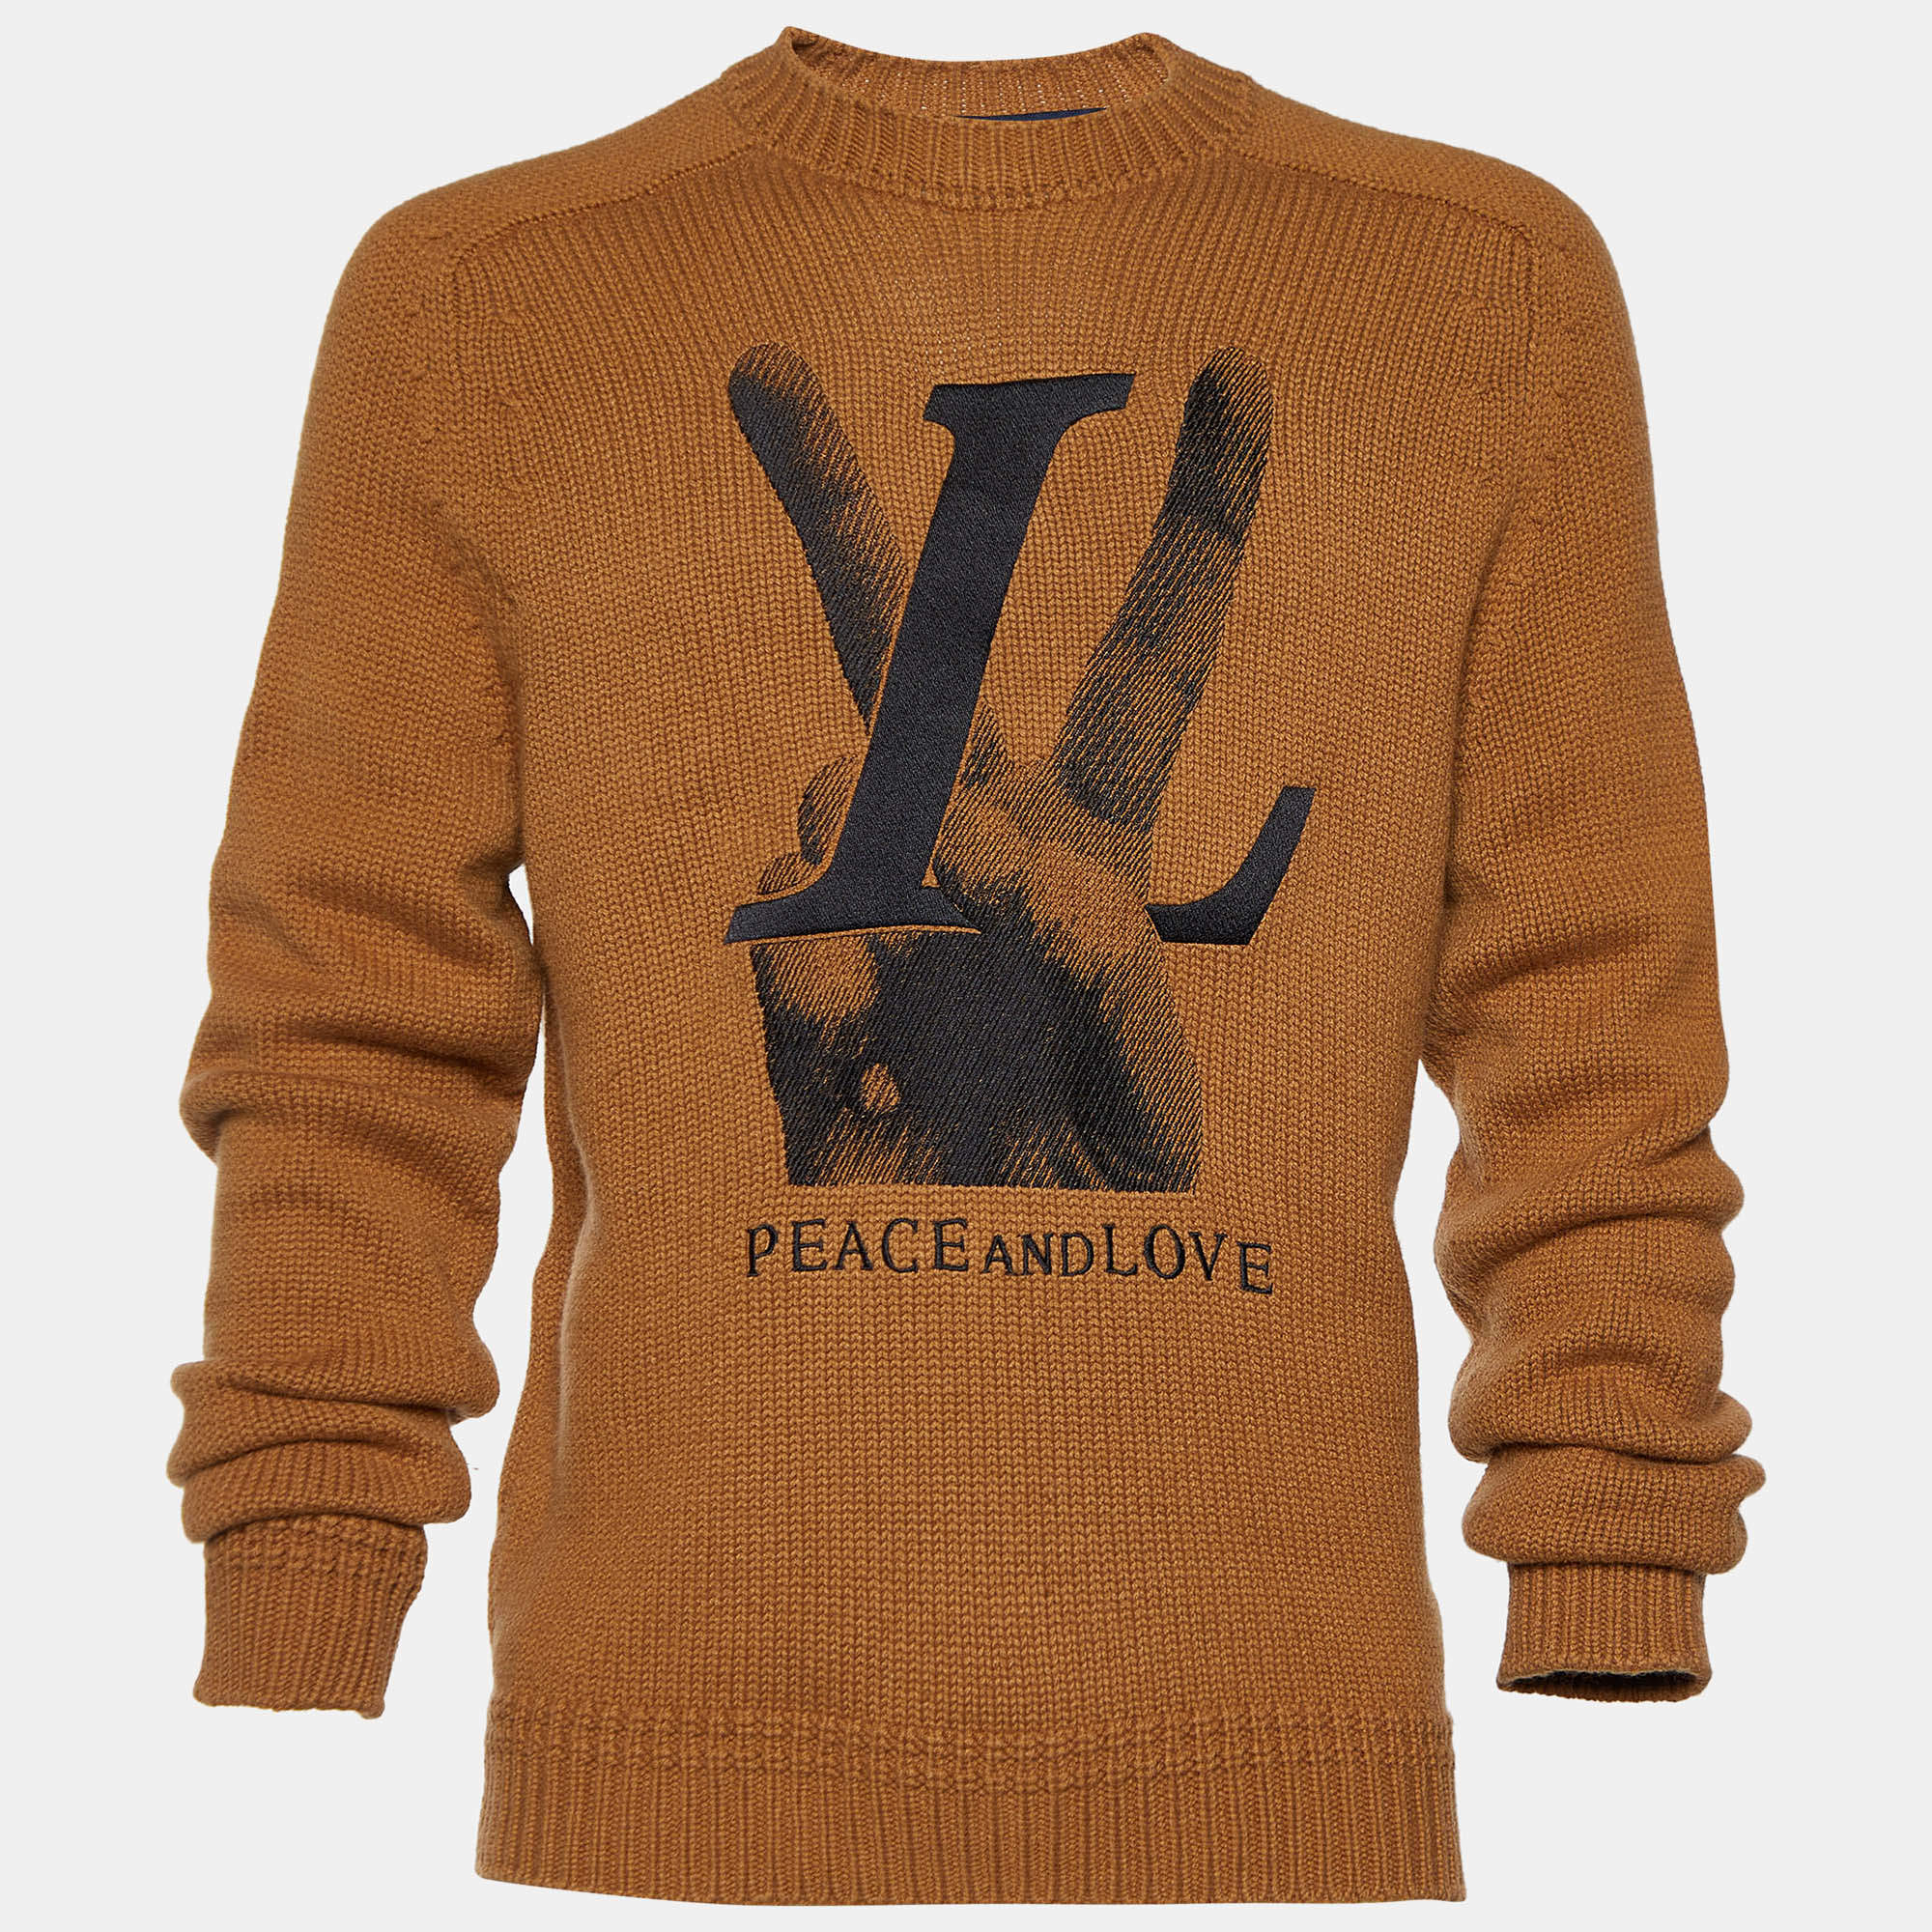 LOUIS VUITTON PEACE AND LOVE BROWN KNITTED SWEATER 227028097 EK